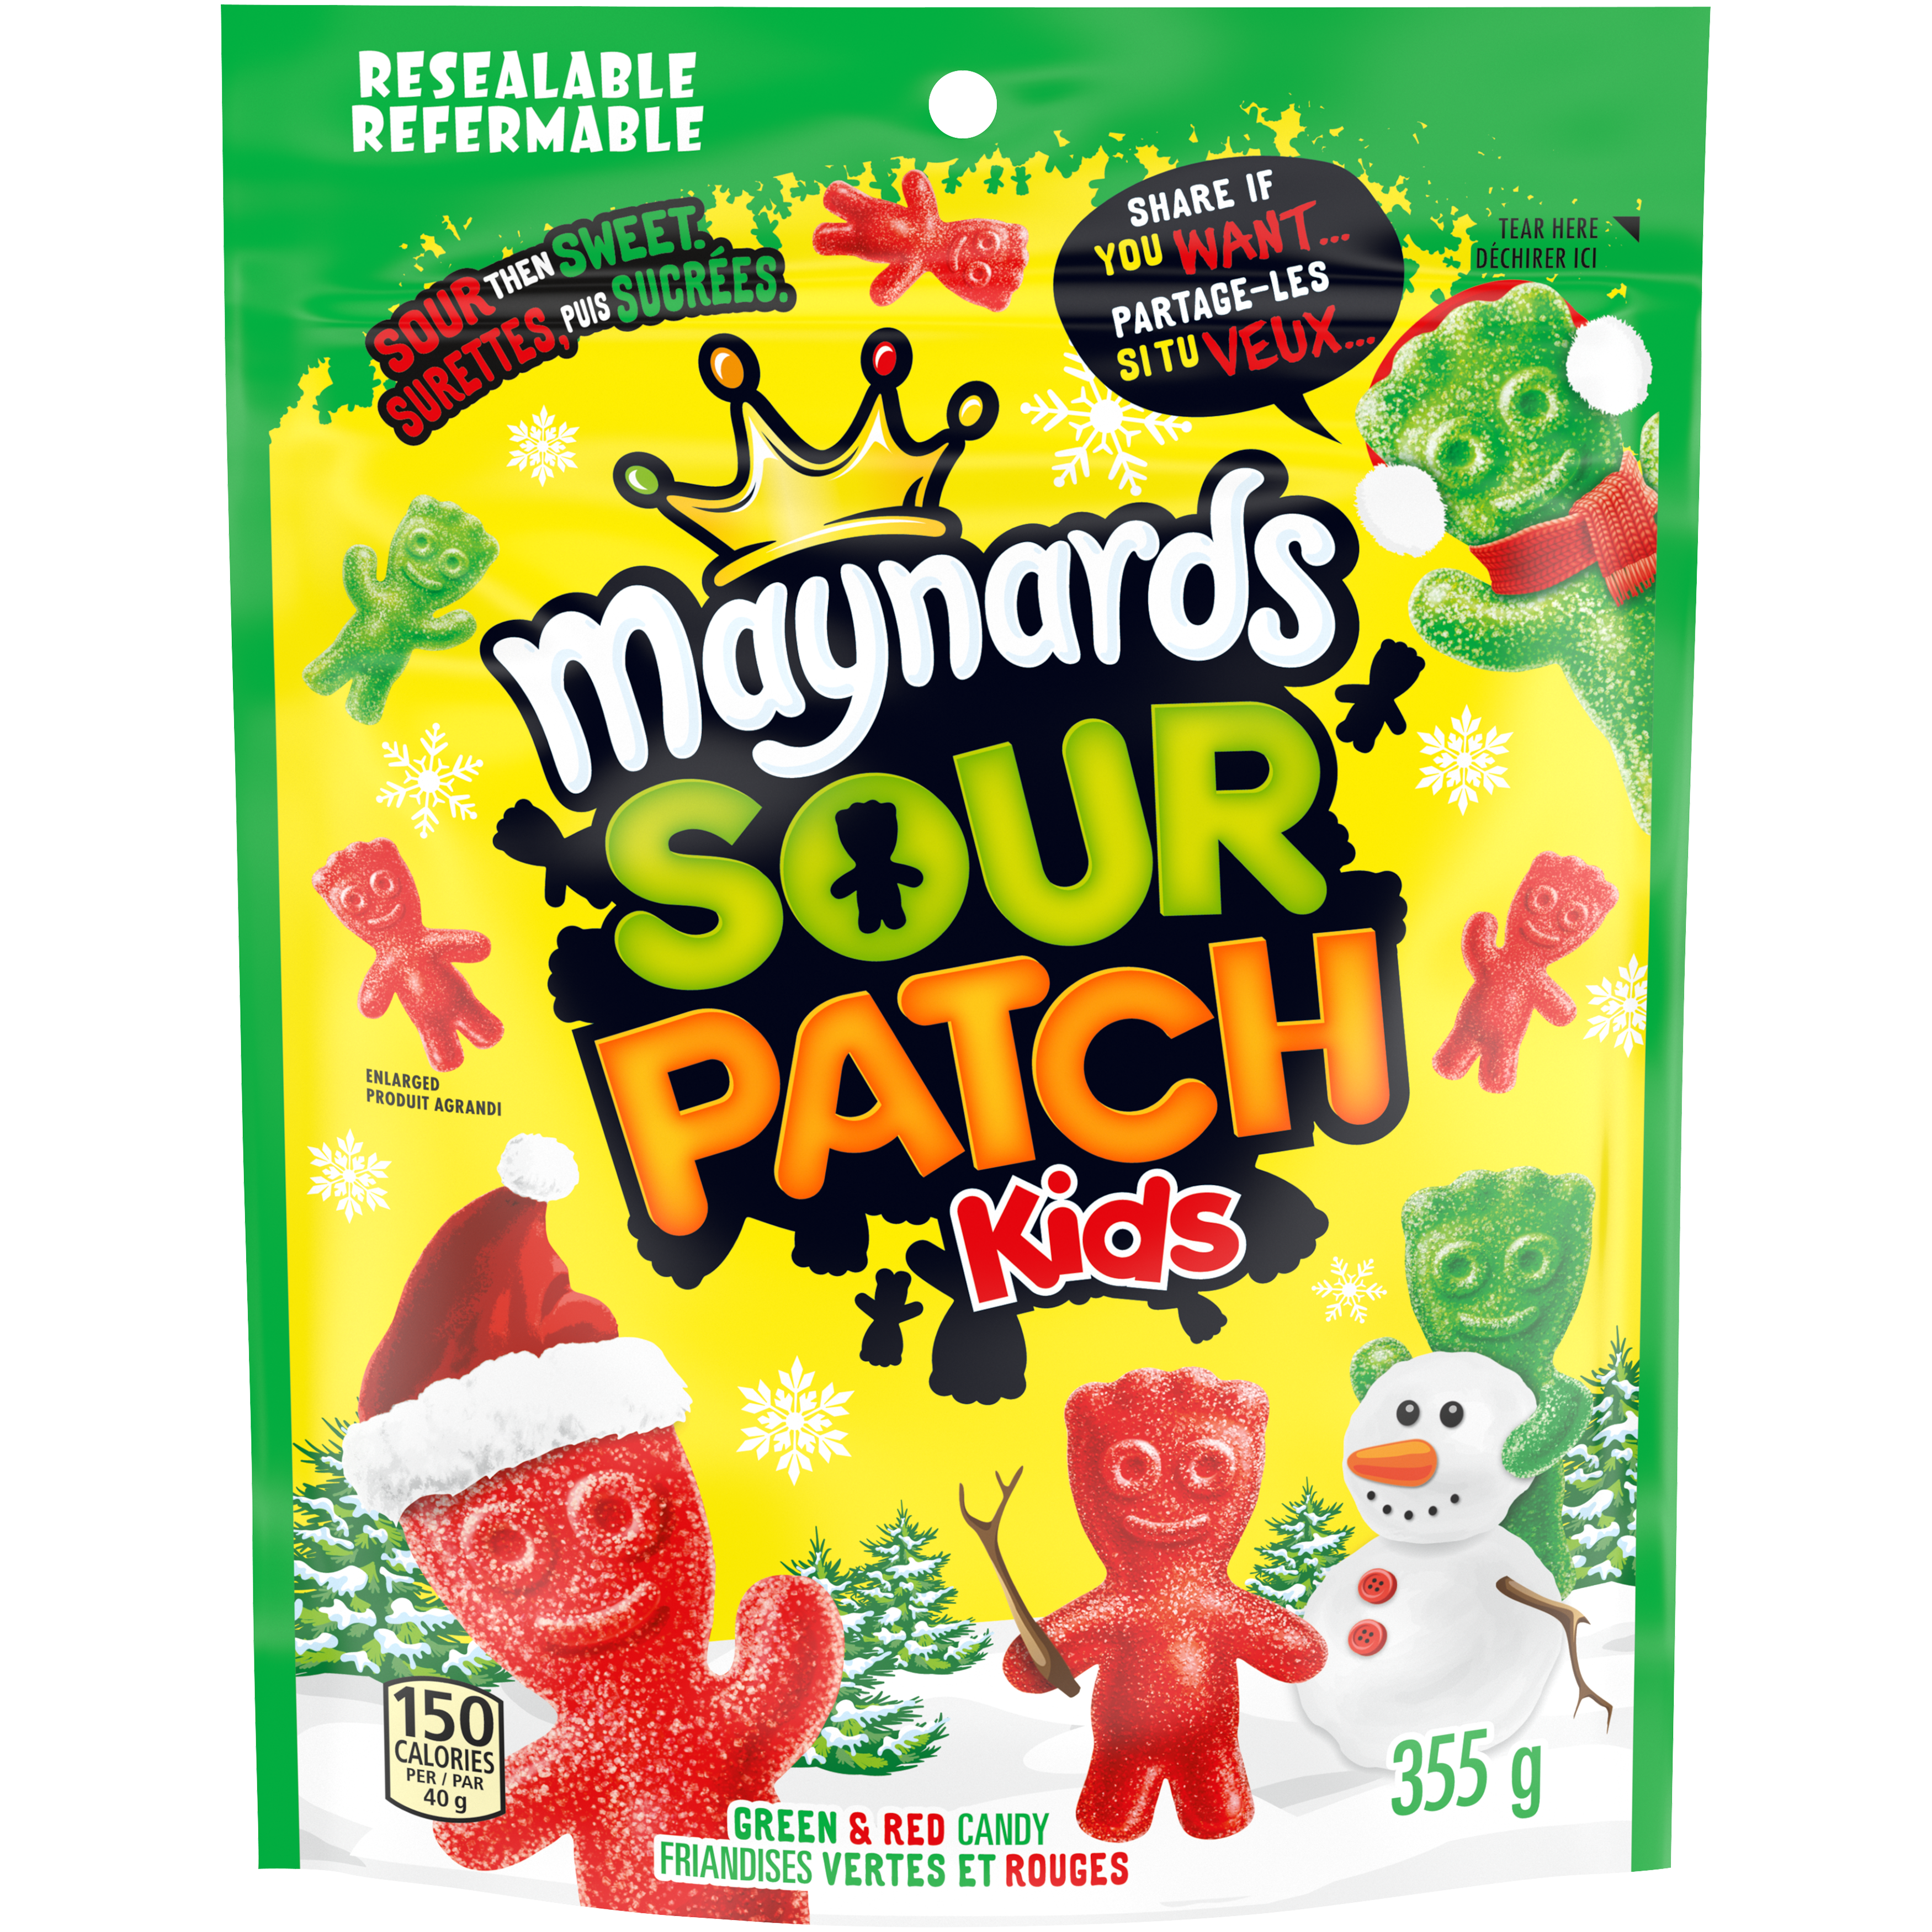 MAYNARDS Sour Patch Kids Red and Green Candy for Christmas (Resealable Bag, 355 g)